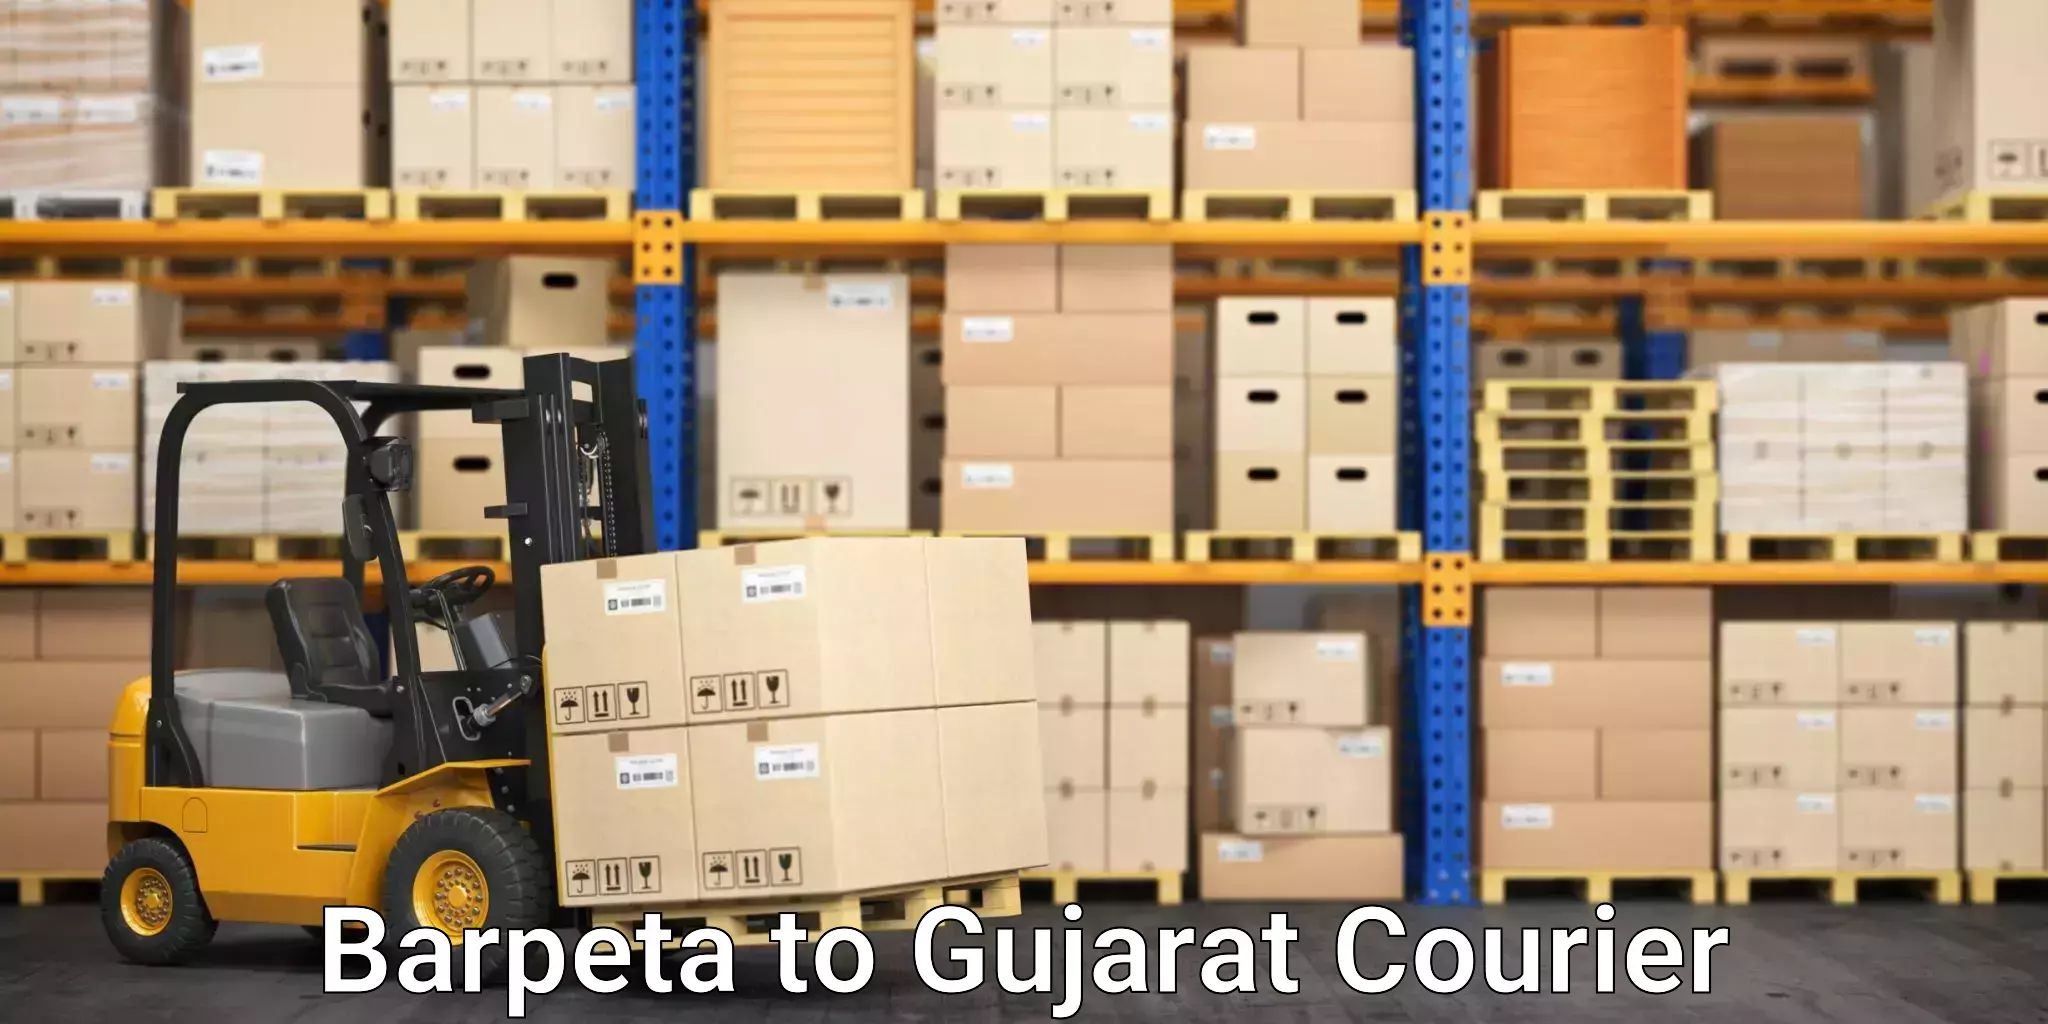 Round-the-clock parcel delivery Barpeta to Bhuj